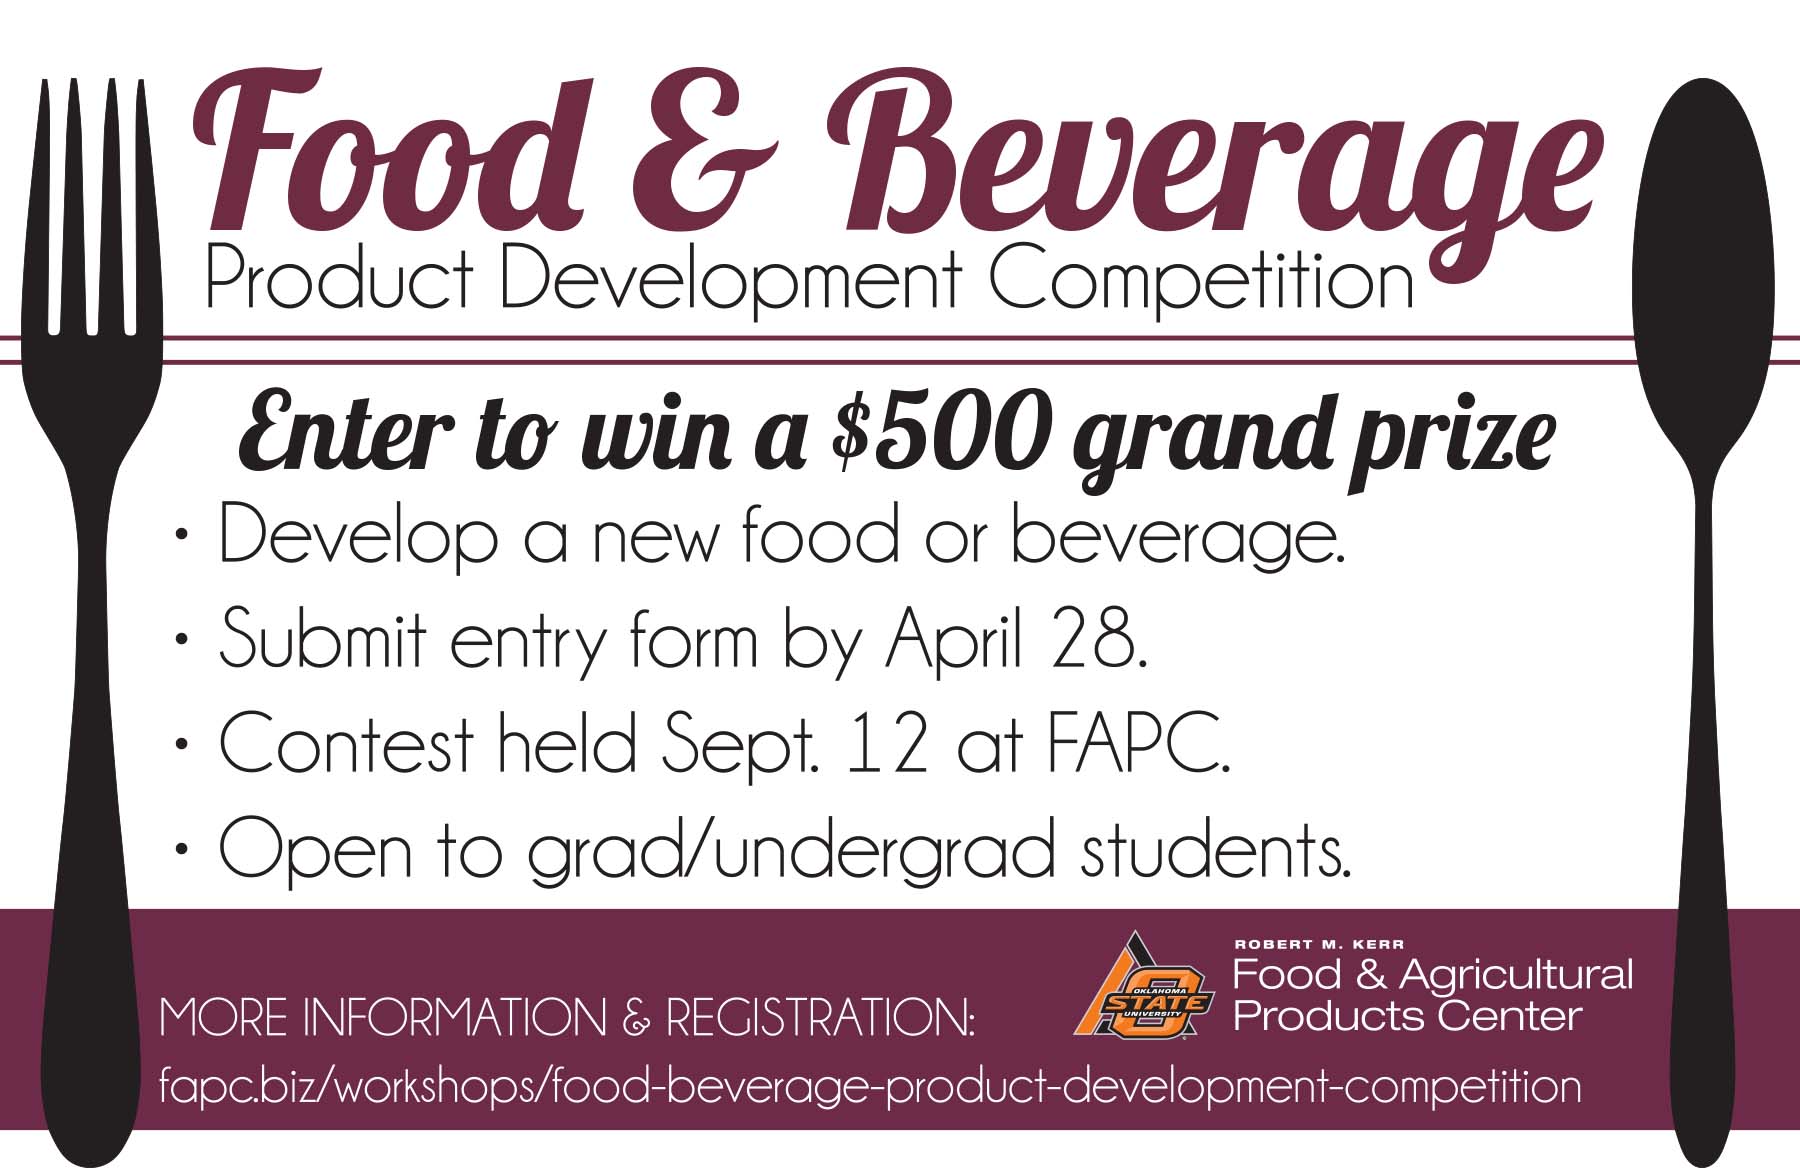 FAPC seeking college students for food and beverage innovations